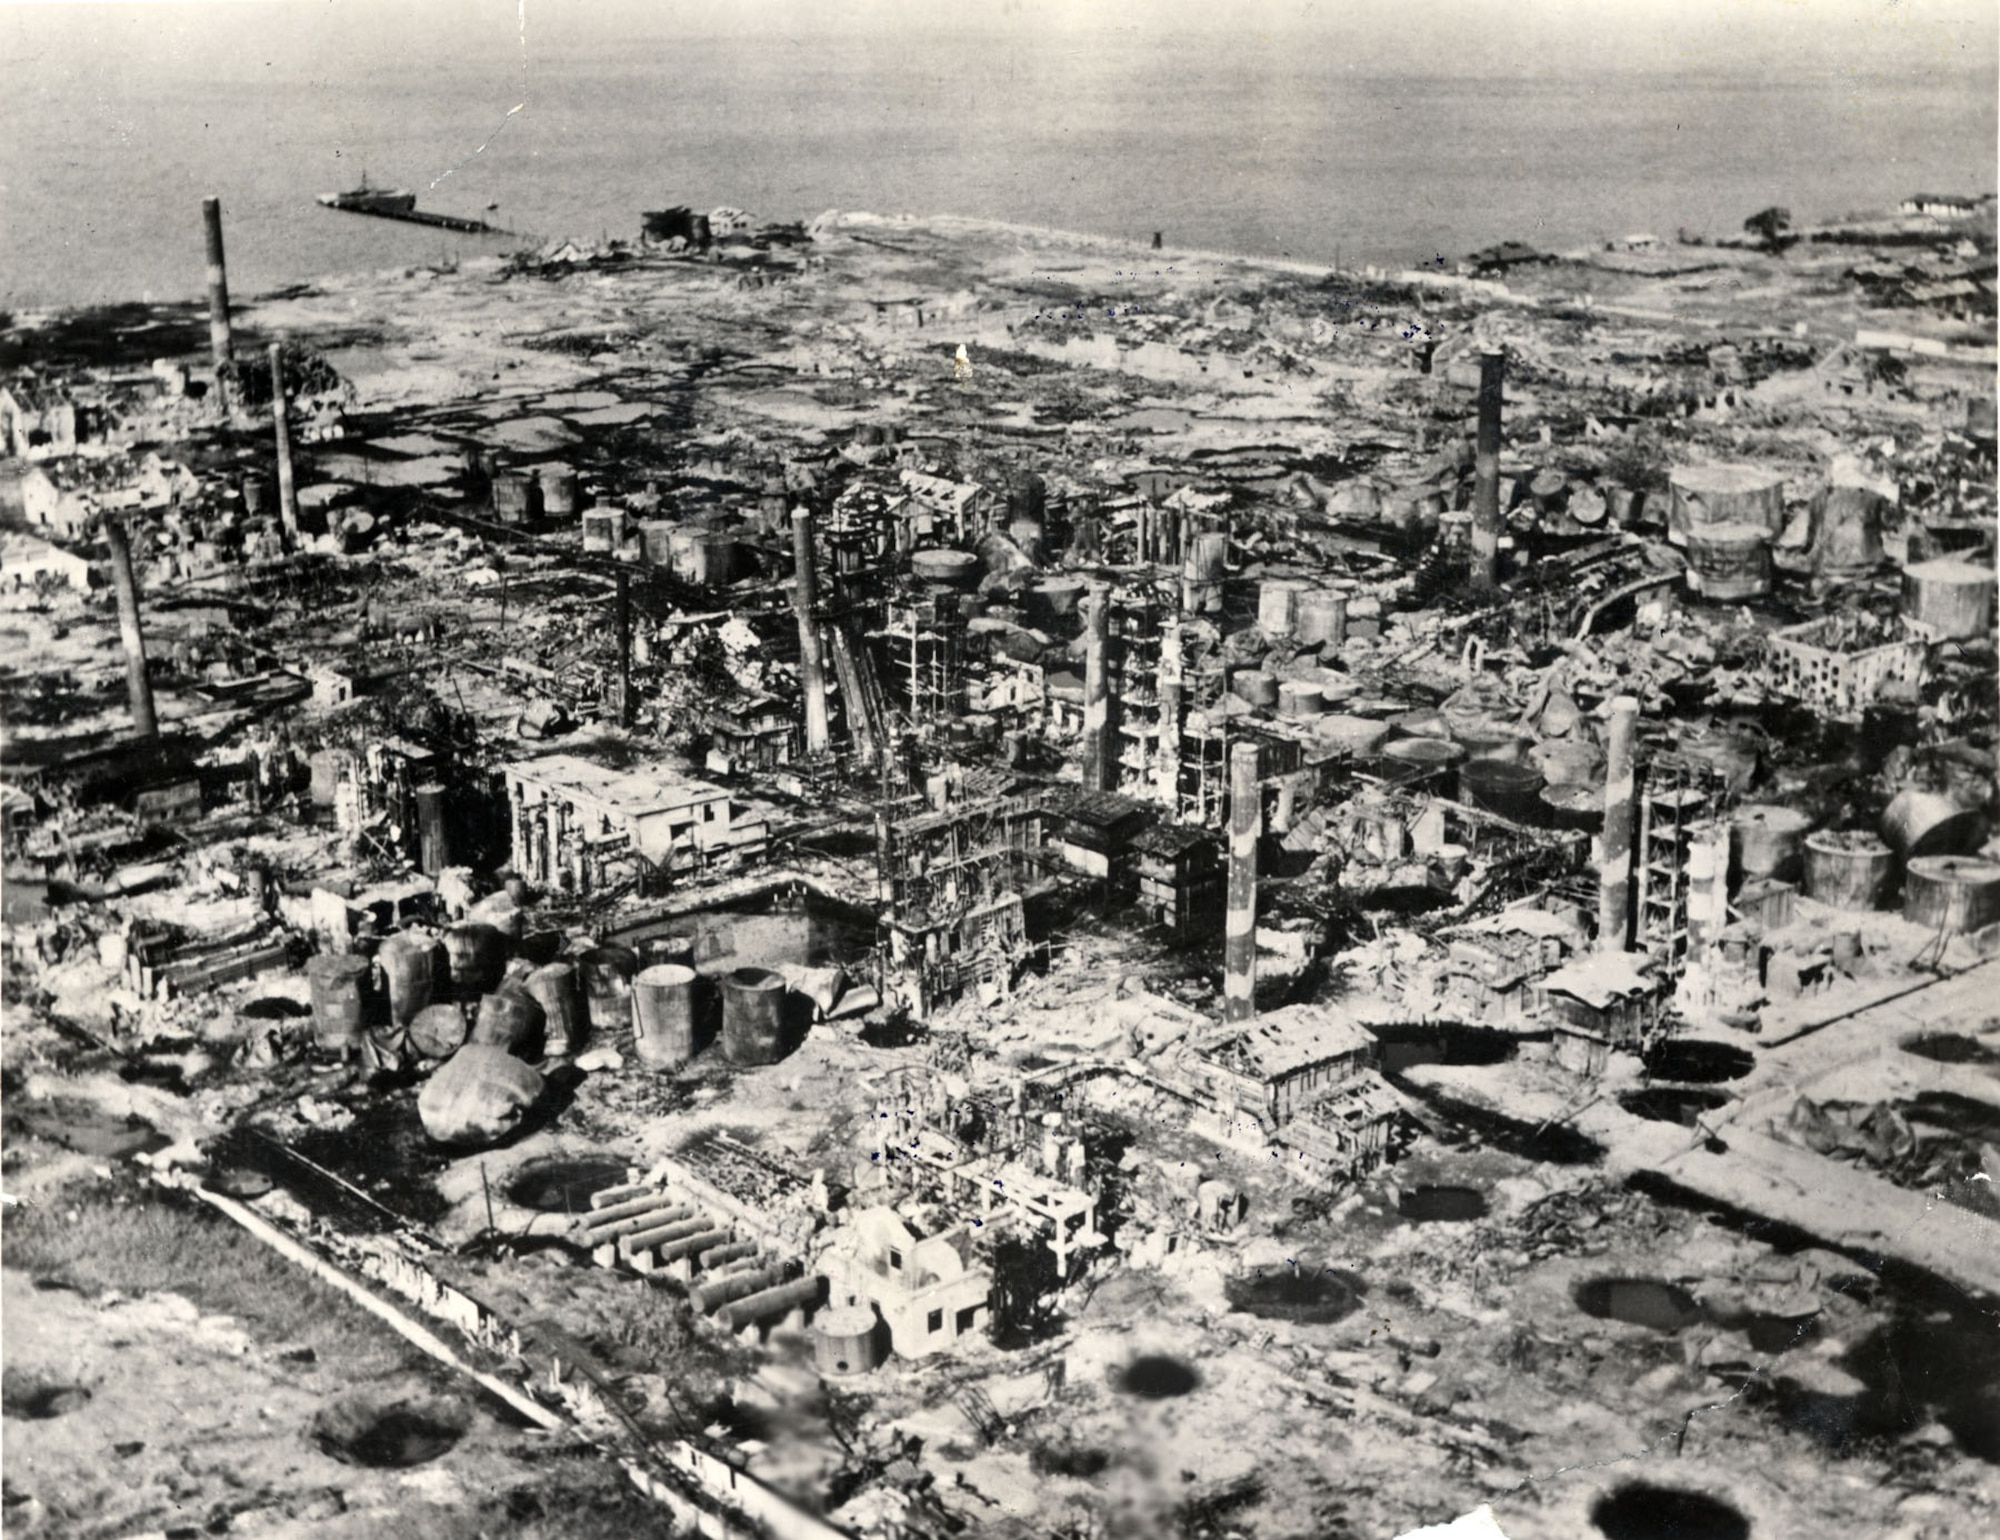 This post-strike photo of the Wonsan petroleum refinery shows 95 percent damage after B-29 bomber strikes in August 1950. (U.S. Air Force photo)